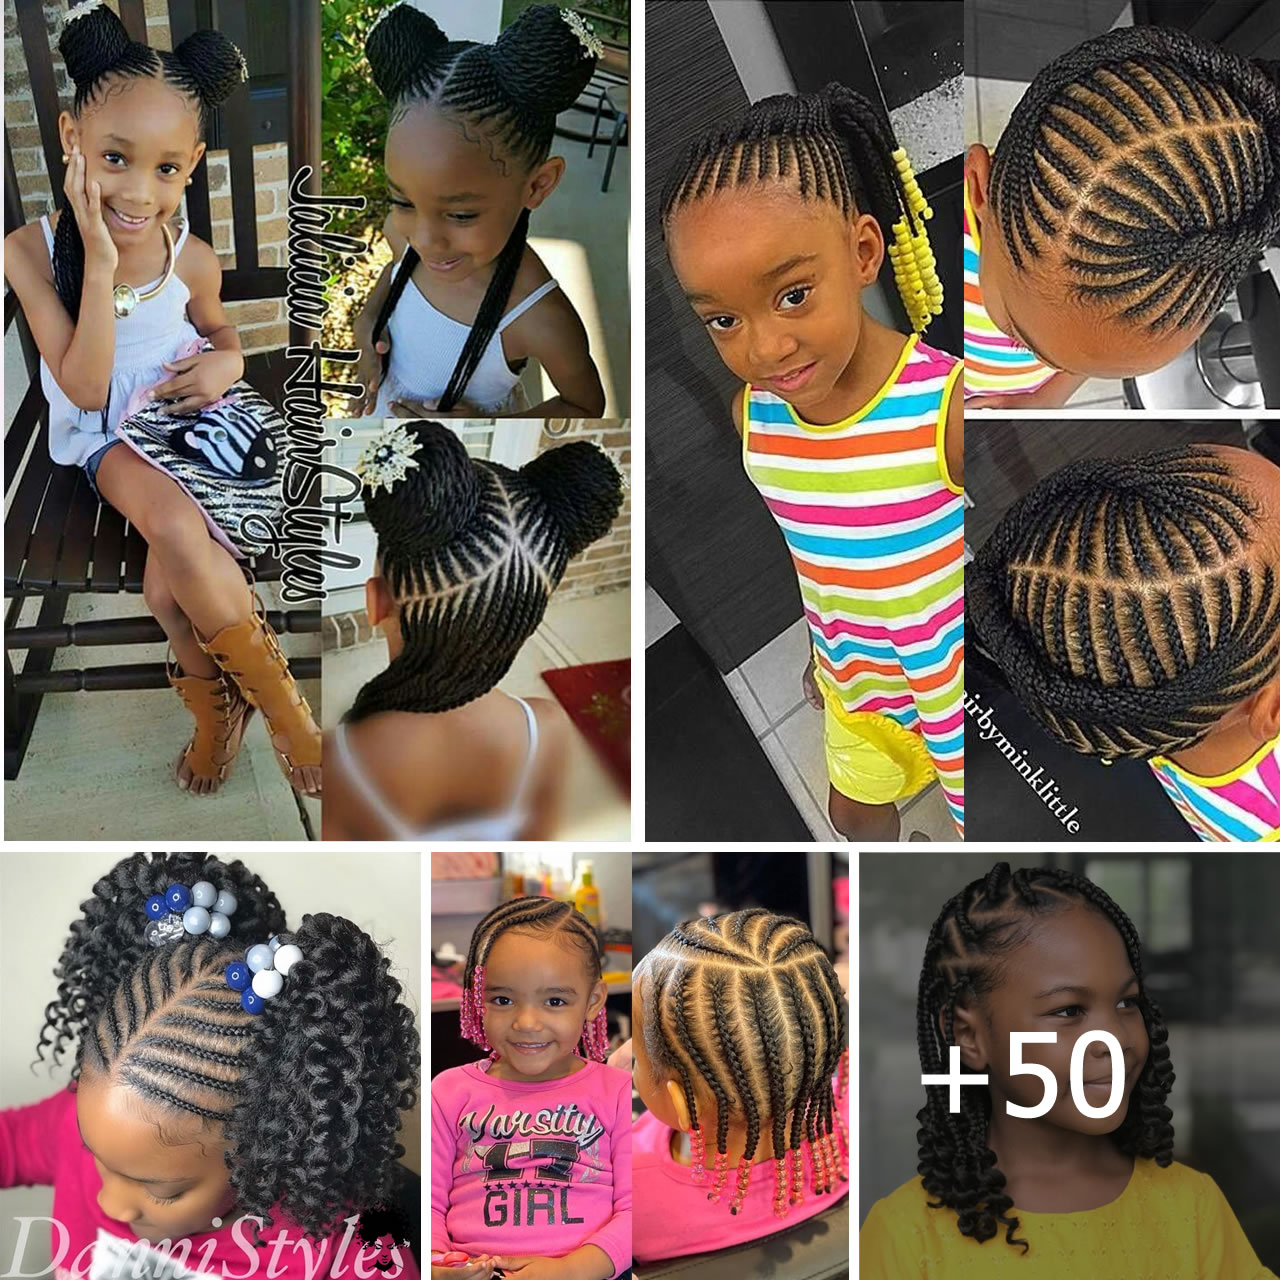 Now-Create-Your-Daughters-Hair-Style-With-Half-Buns-2-1.jpg (1280×1280)